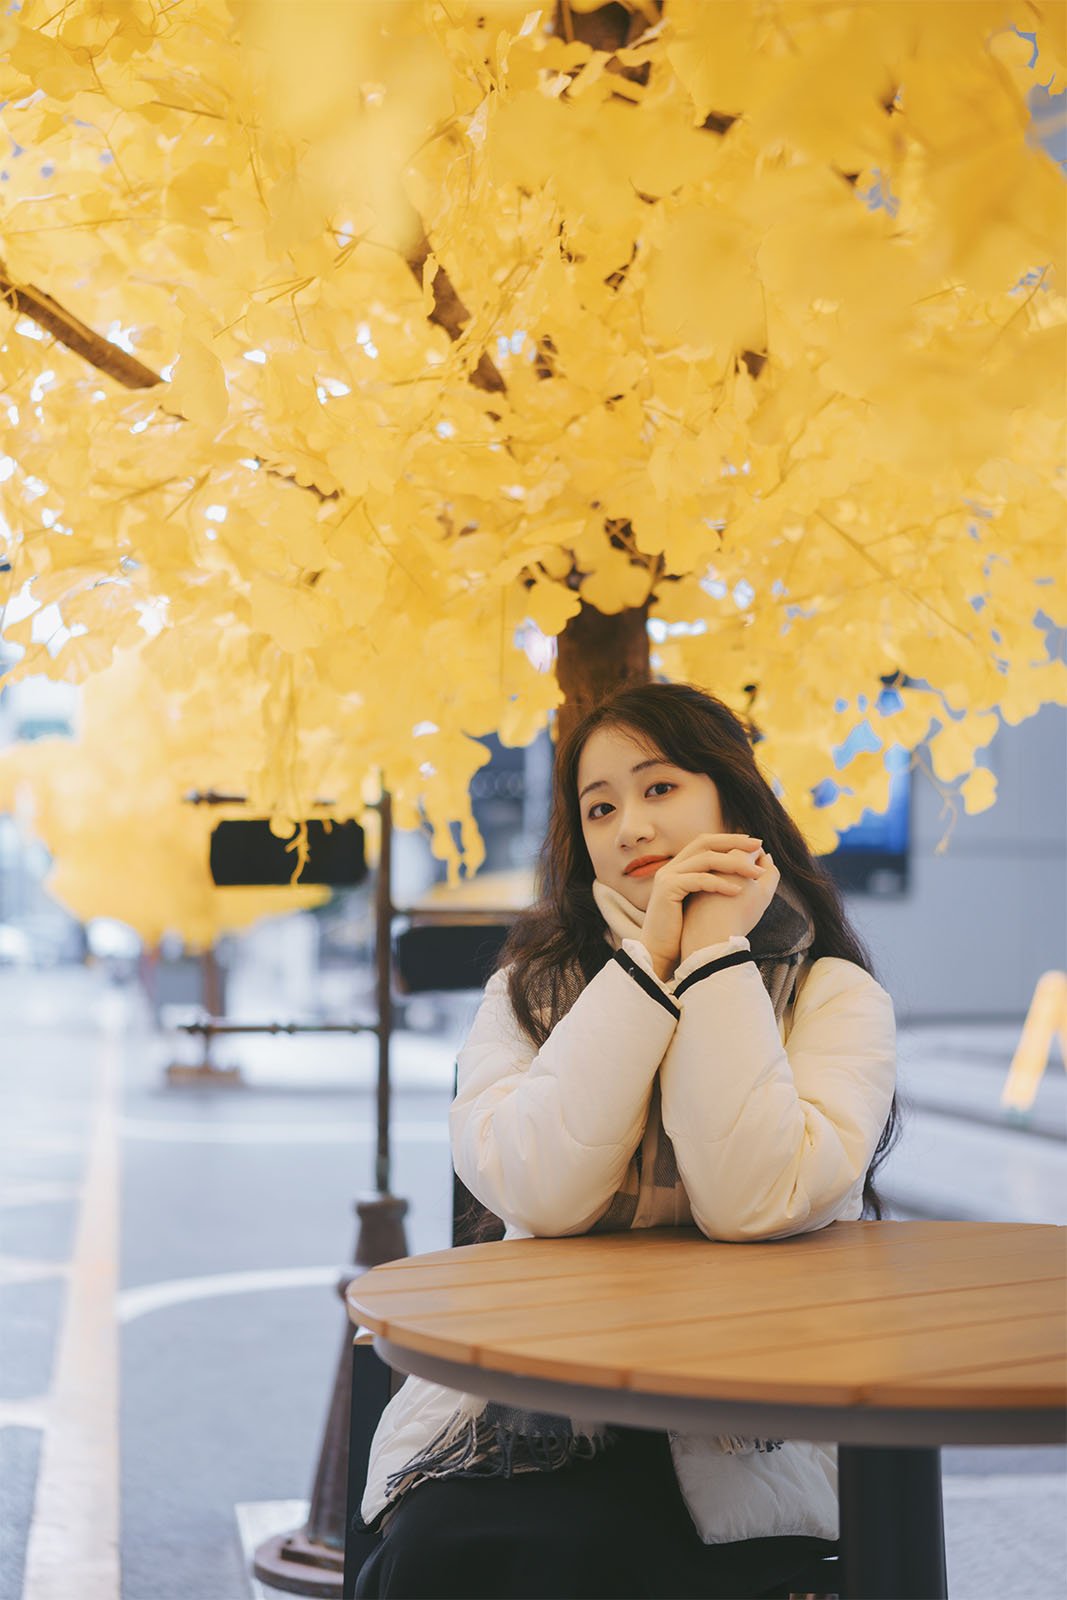 A young woman sits at an outdoor table under a canopy of bright yellow autumn leaves, her elbows on the table and hands under her chin, looking thoughtful.